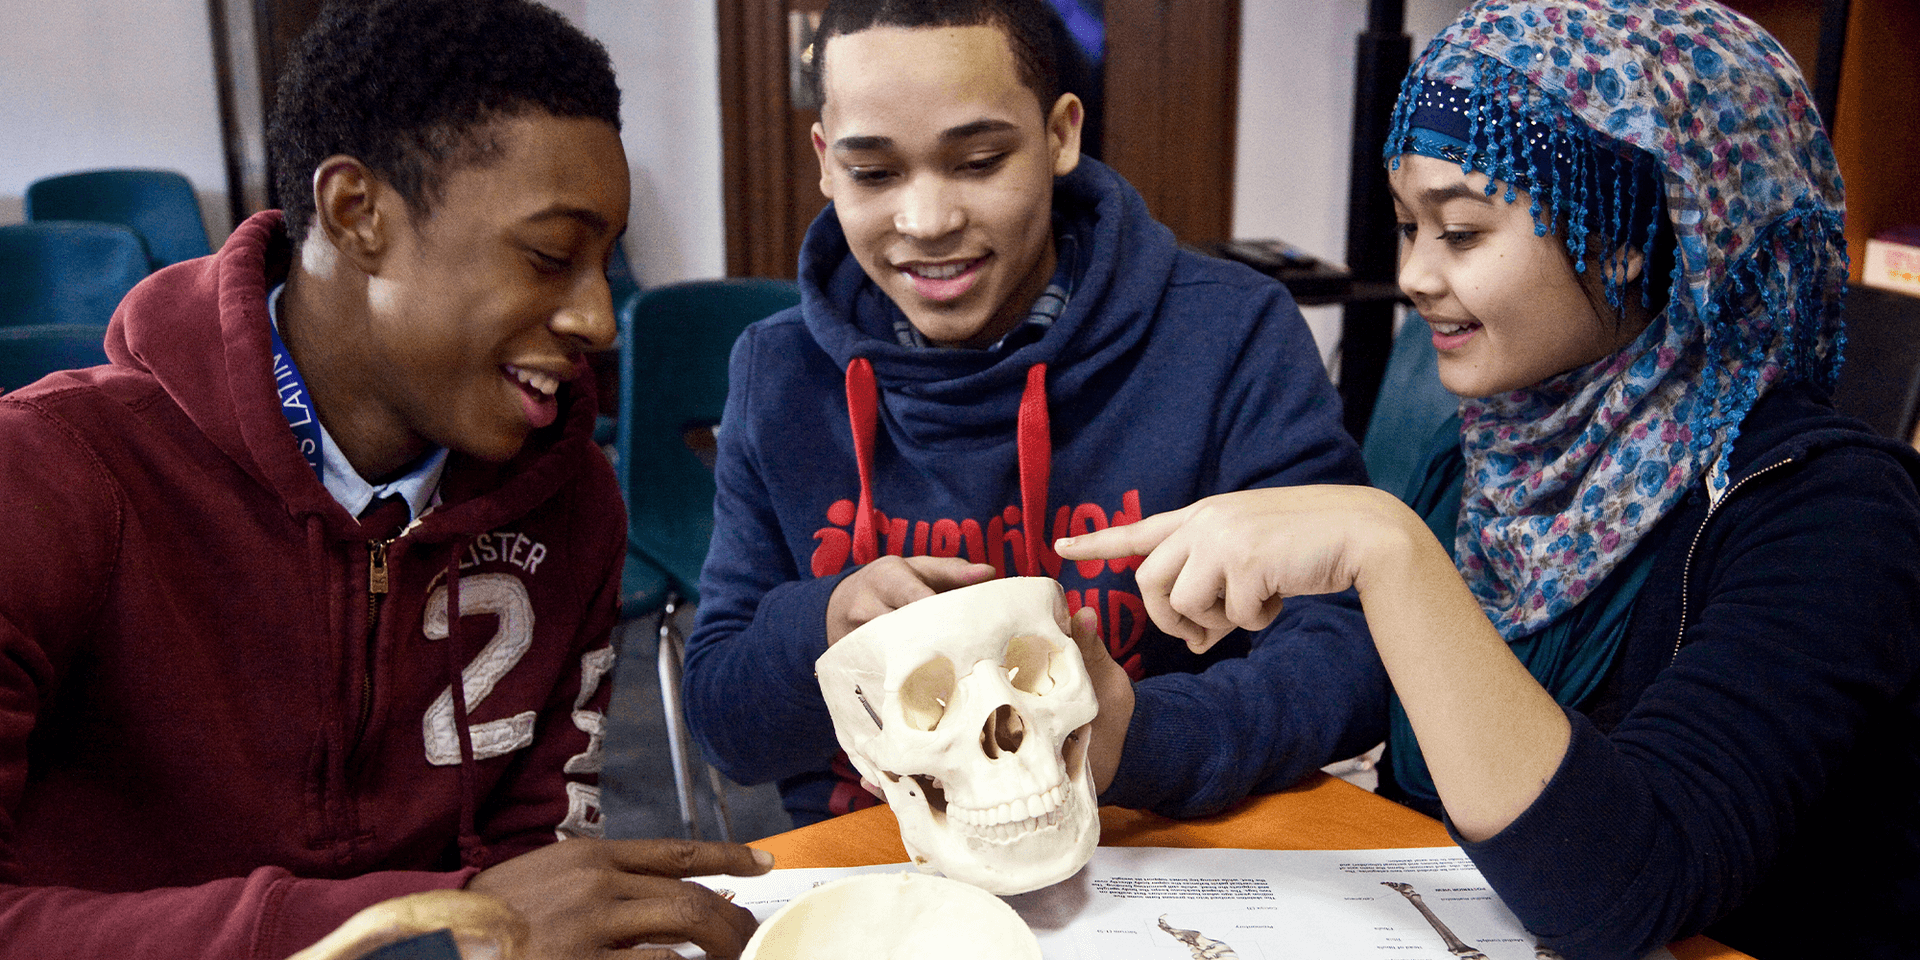 Three students analyzing a model of a skull